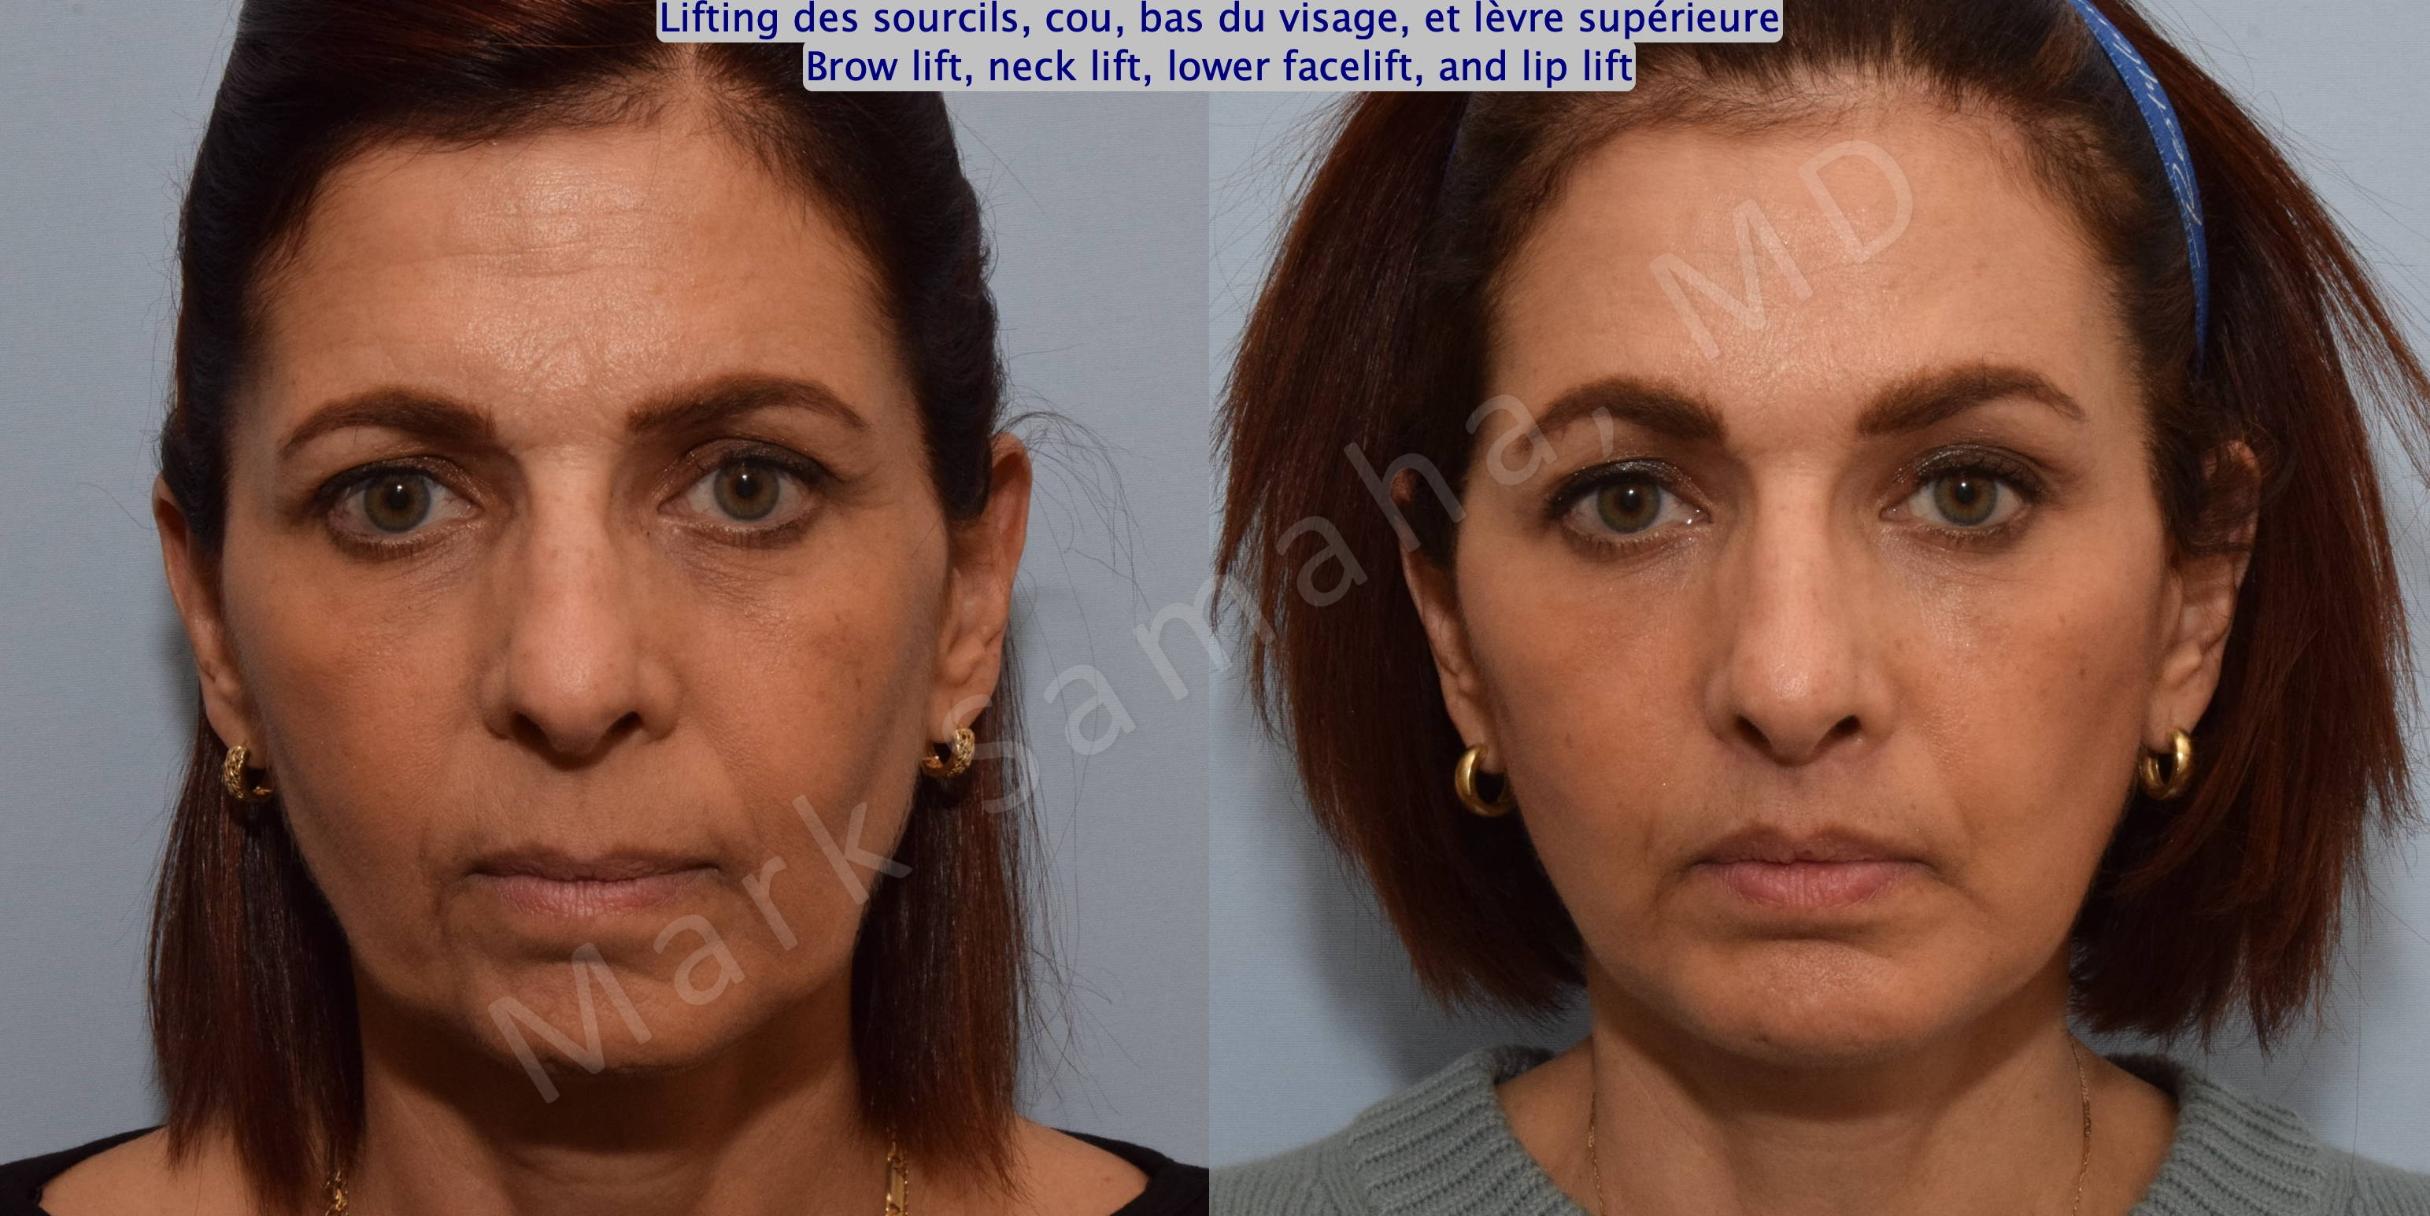 Case 195 – Brow lift, neck lift, lower facelift, and lip lift